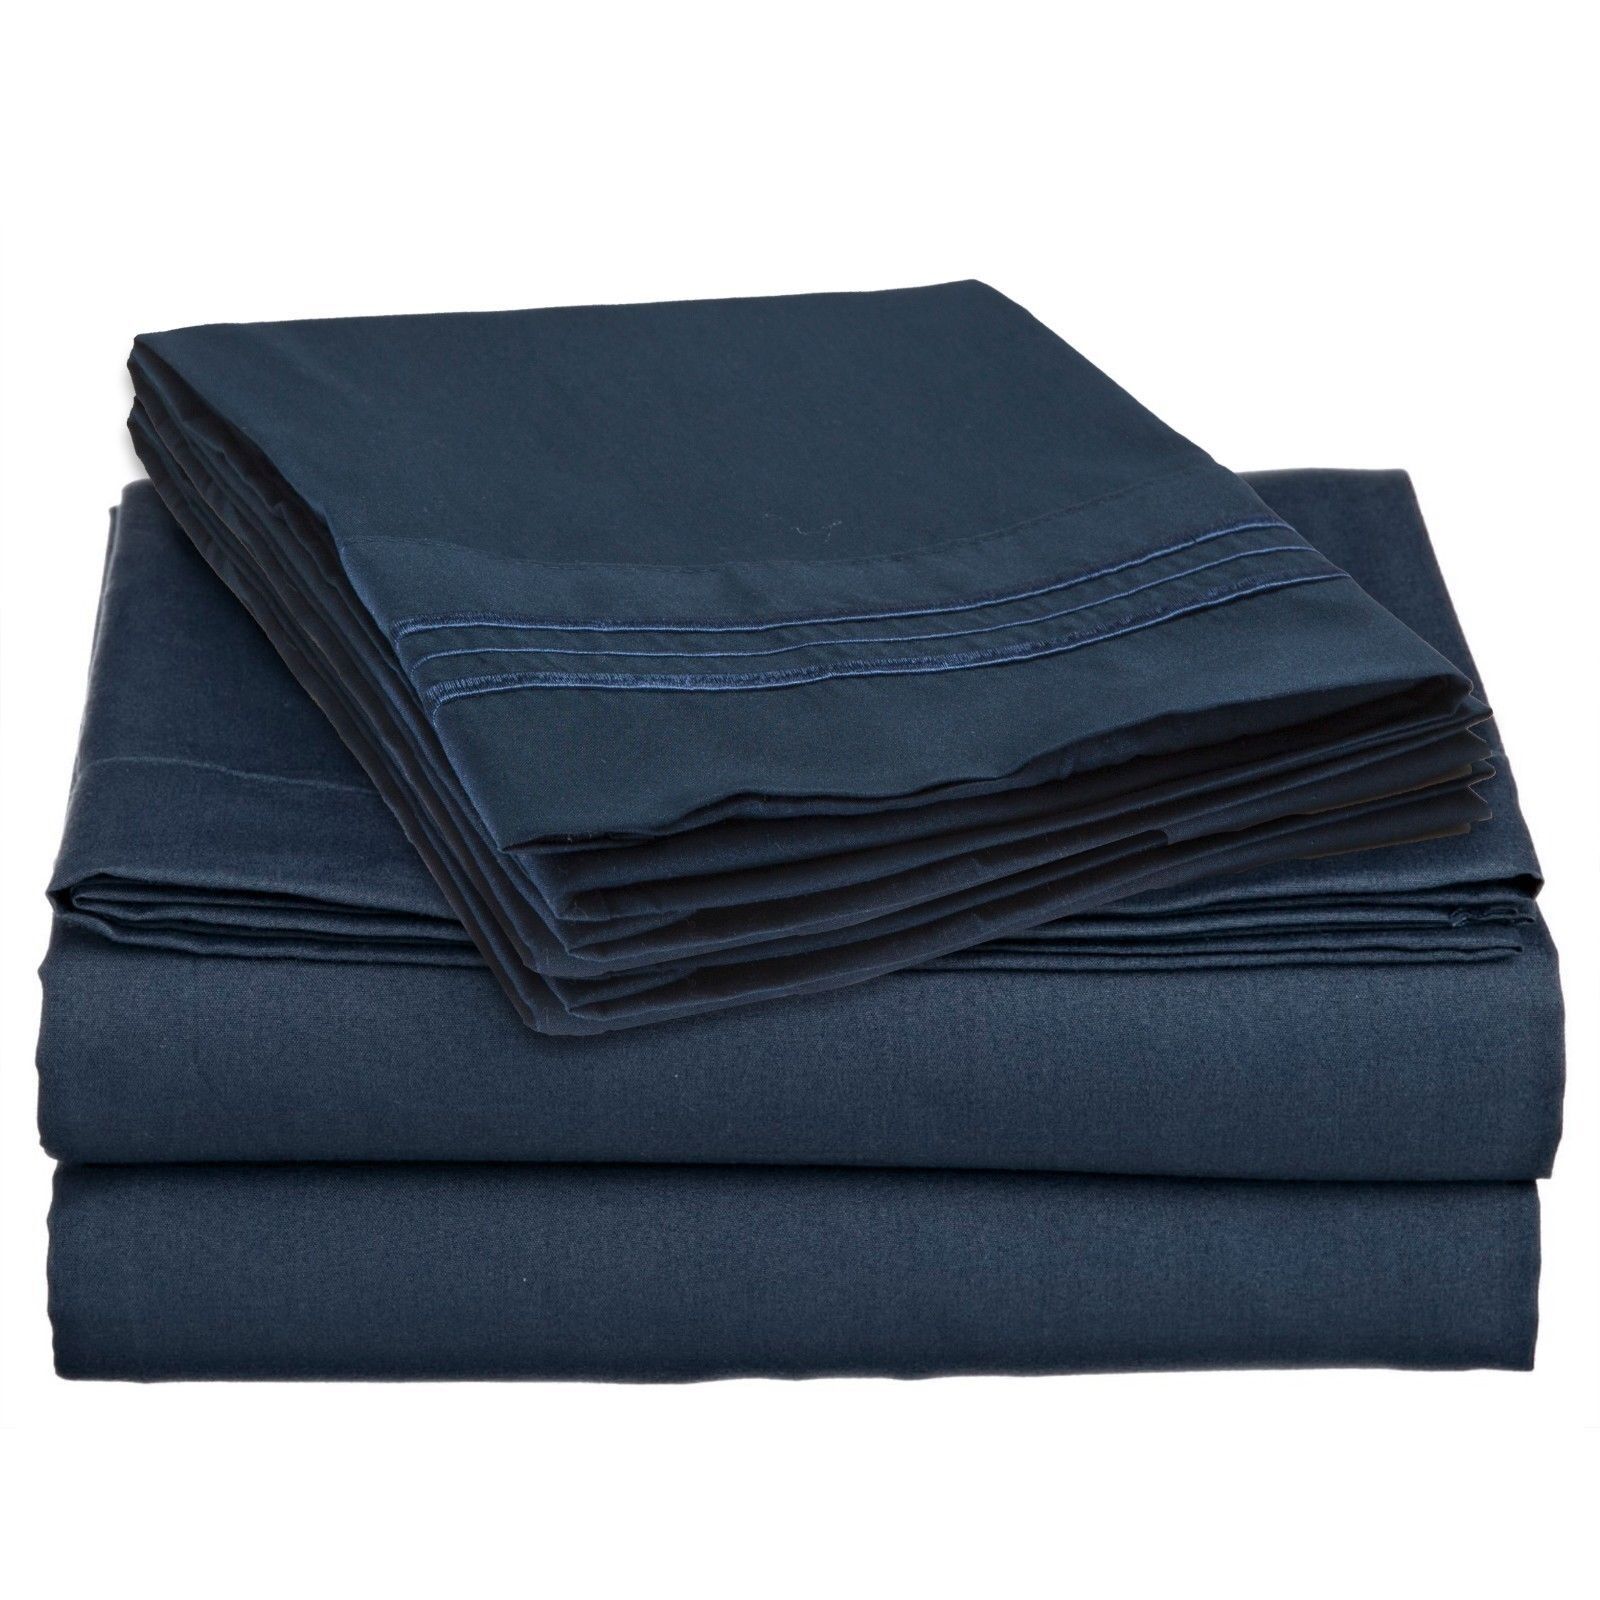 Bed Sheets - Deep Pocket Bed Sheets- 4 Piece Set, Queen, King, Twin, or Full Size - Twin / Navy Blue